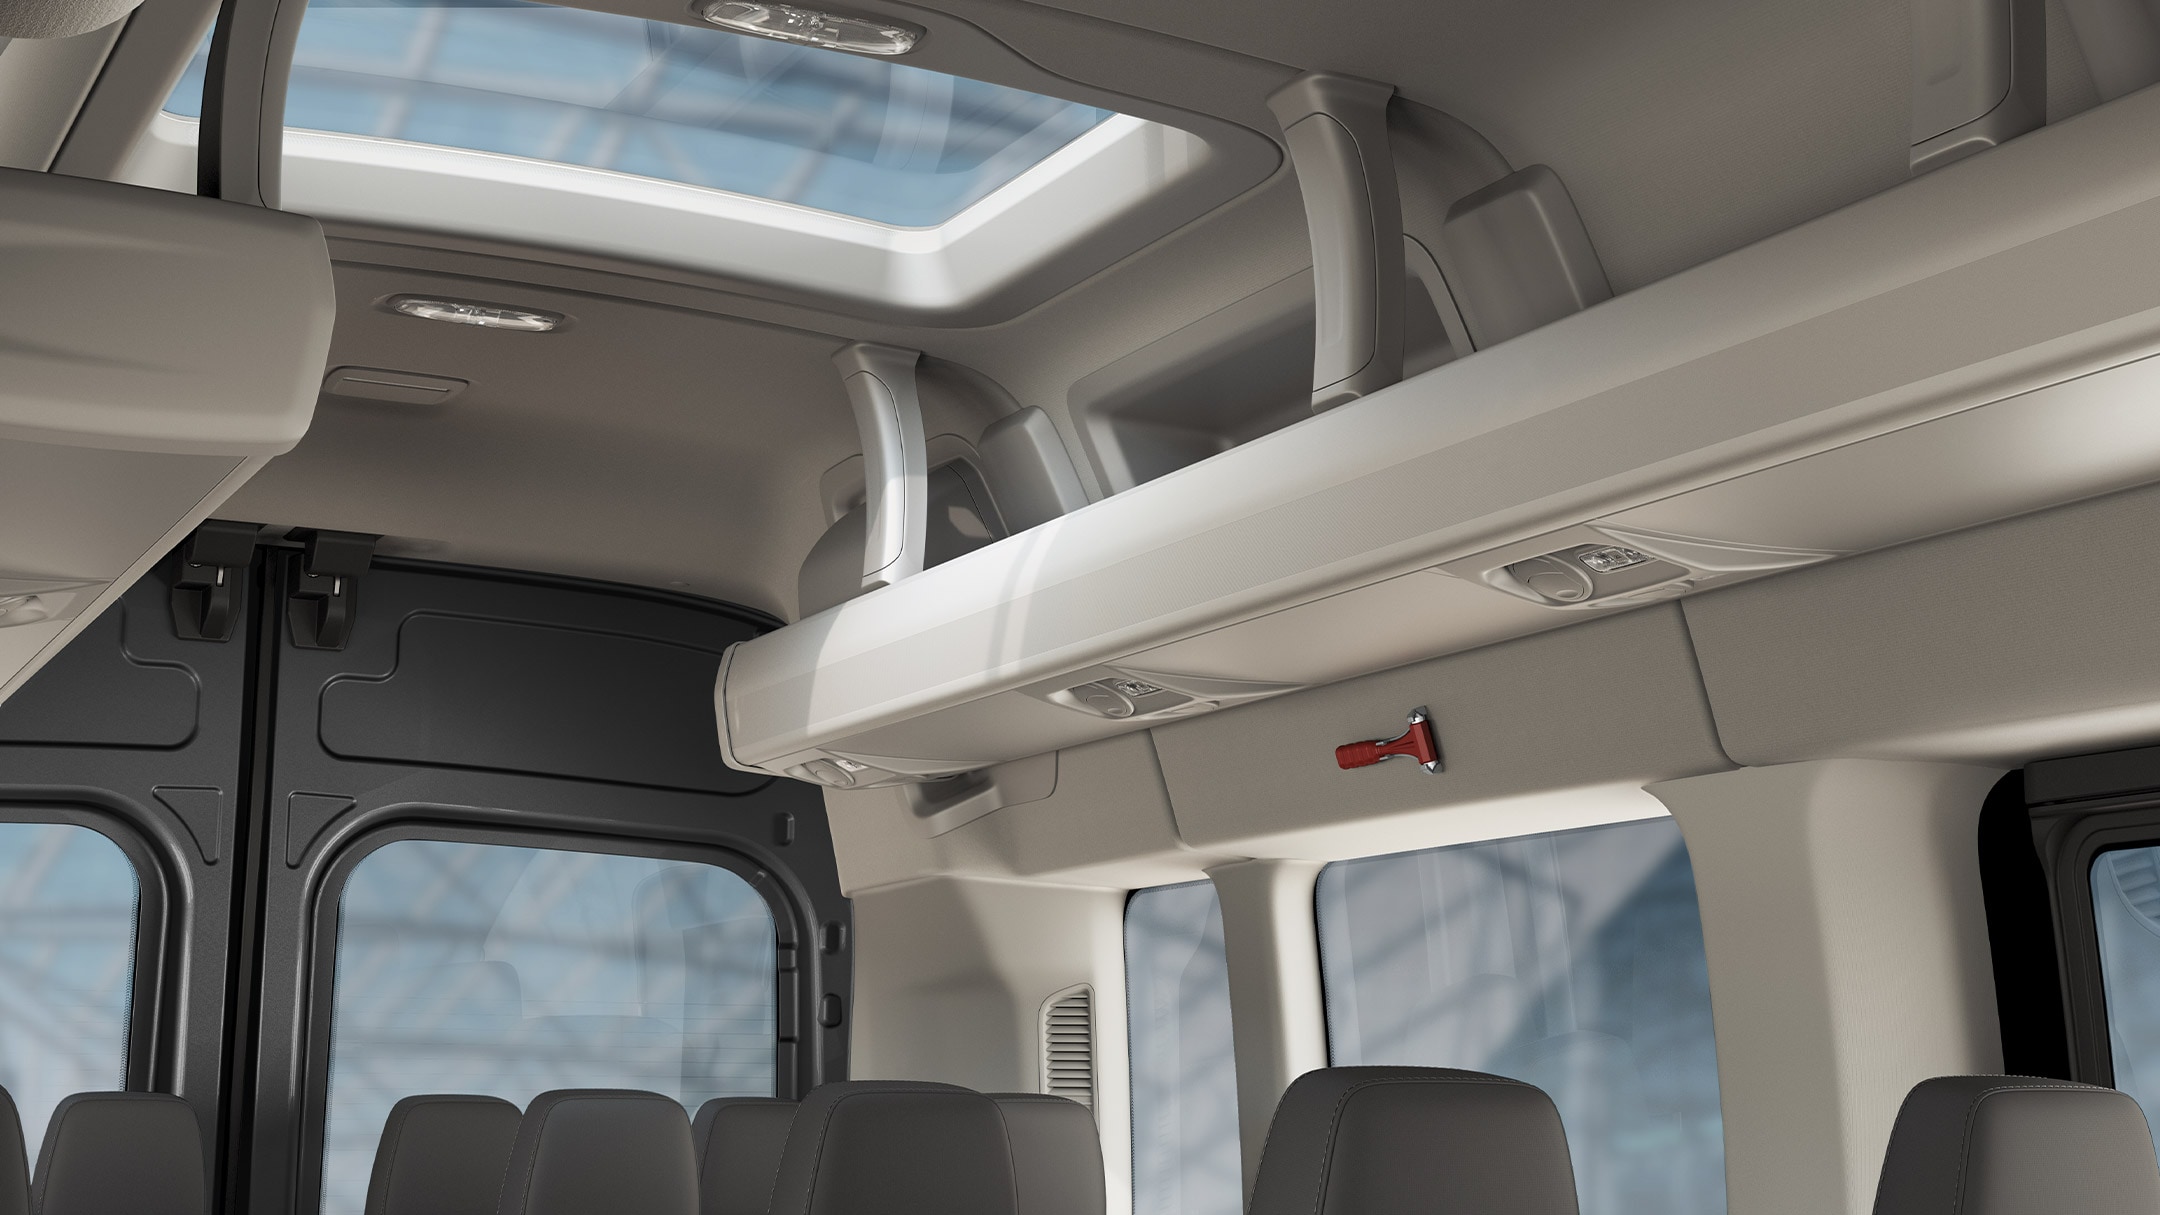 Interior view of the new Ford Transit Minibus